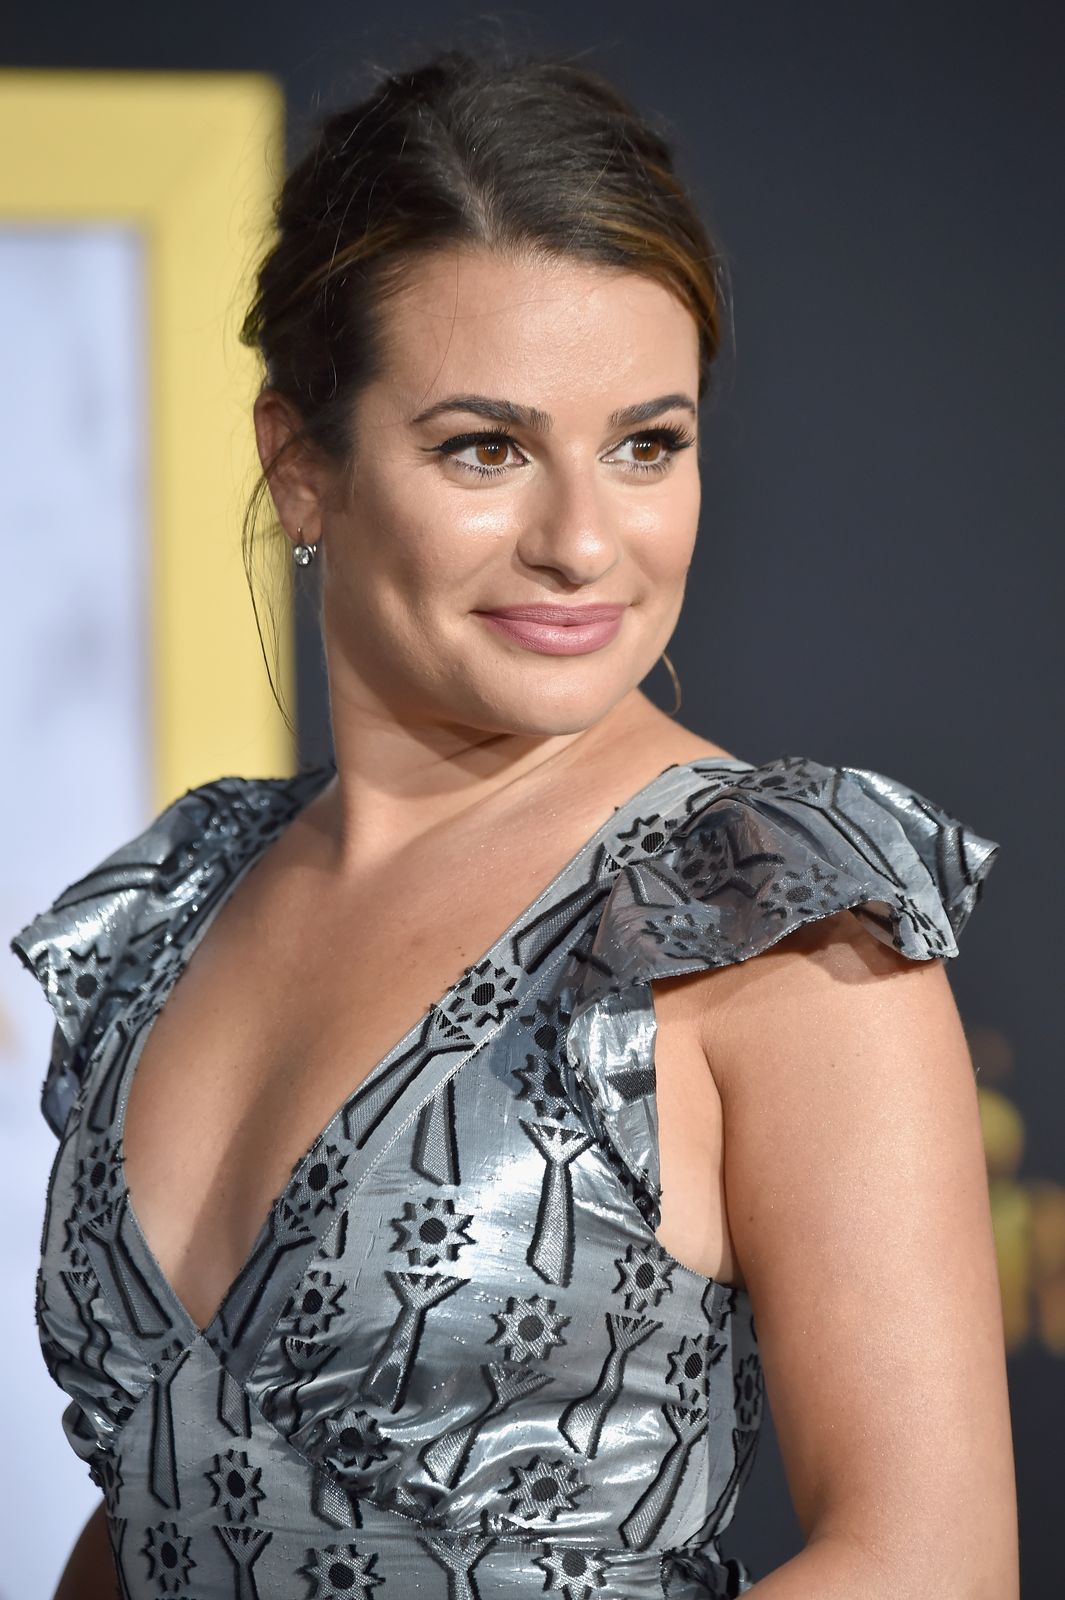 Lea Michele at the premiere of "A Star Is Born" at The Shrine Auditorium on September 24, 2018, in Los Angeles, California | Photo: Kevin Mazur/Getty Images